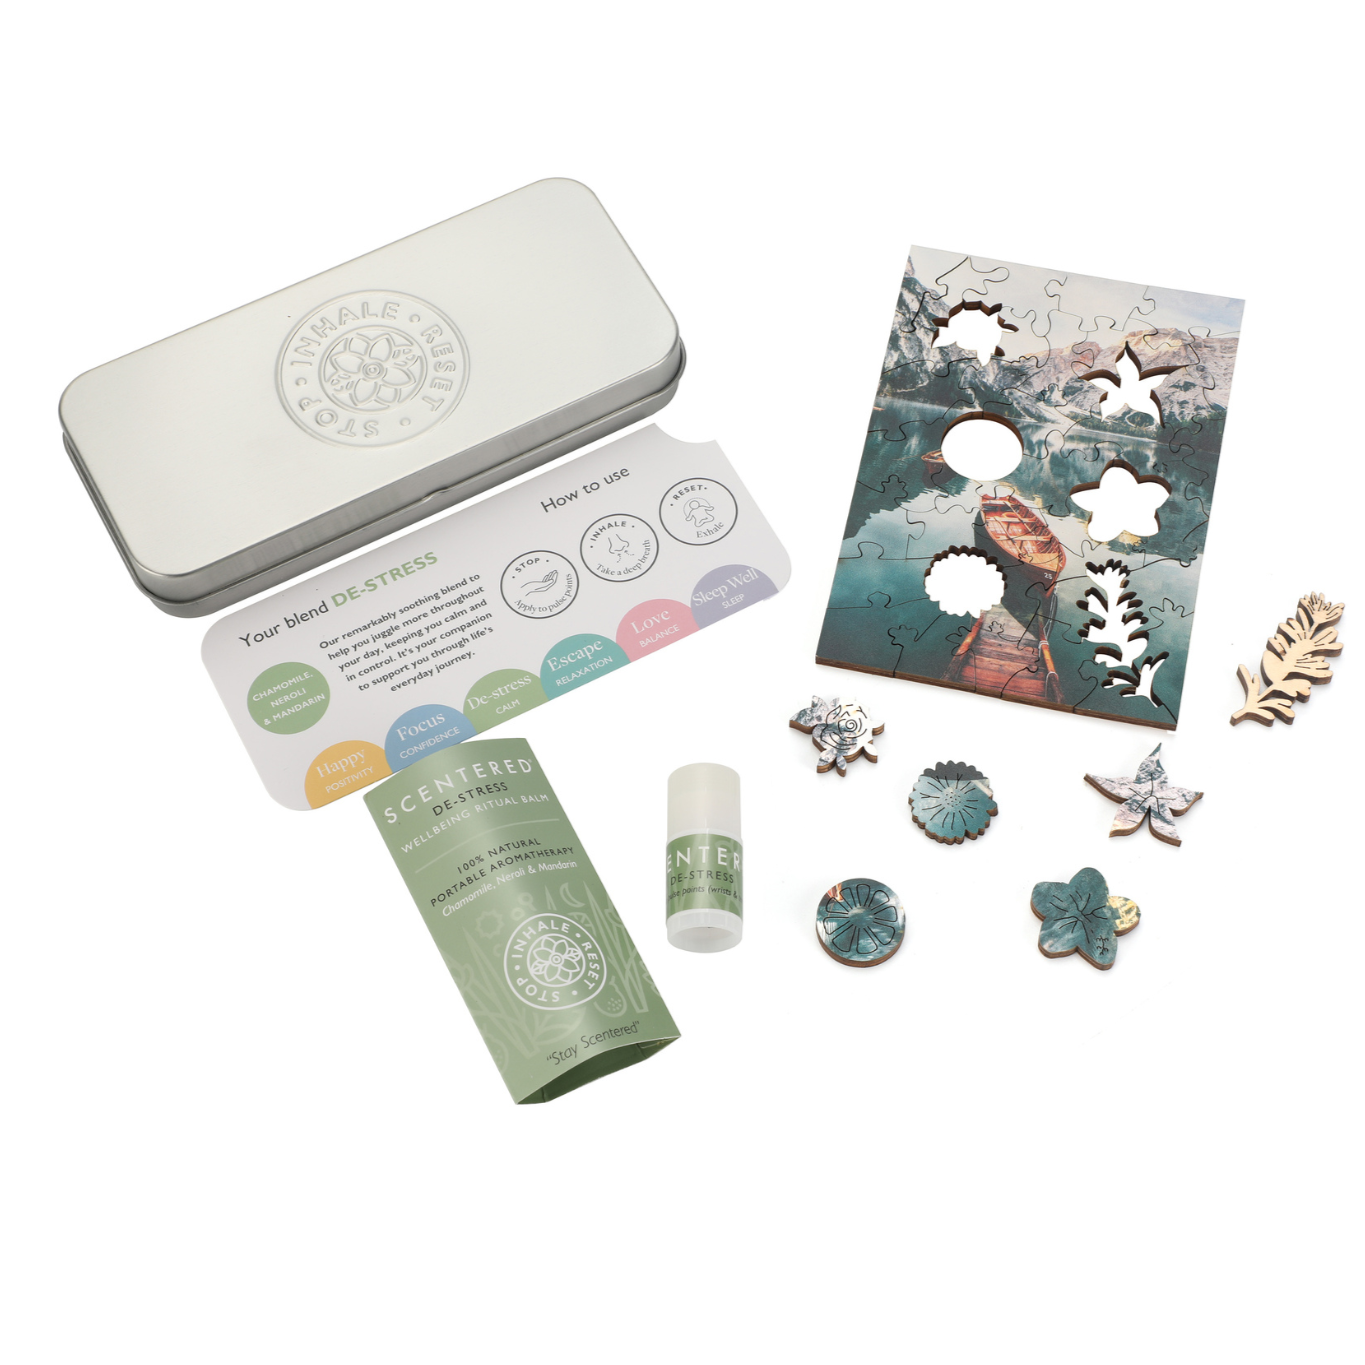 Scentered De-stress Aromatherapy Balm and Puzzle set flat lay image